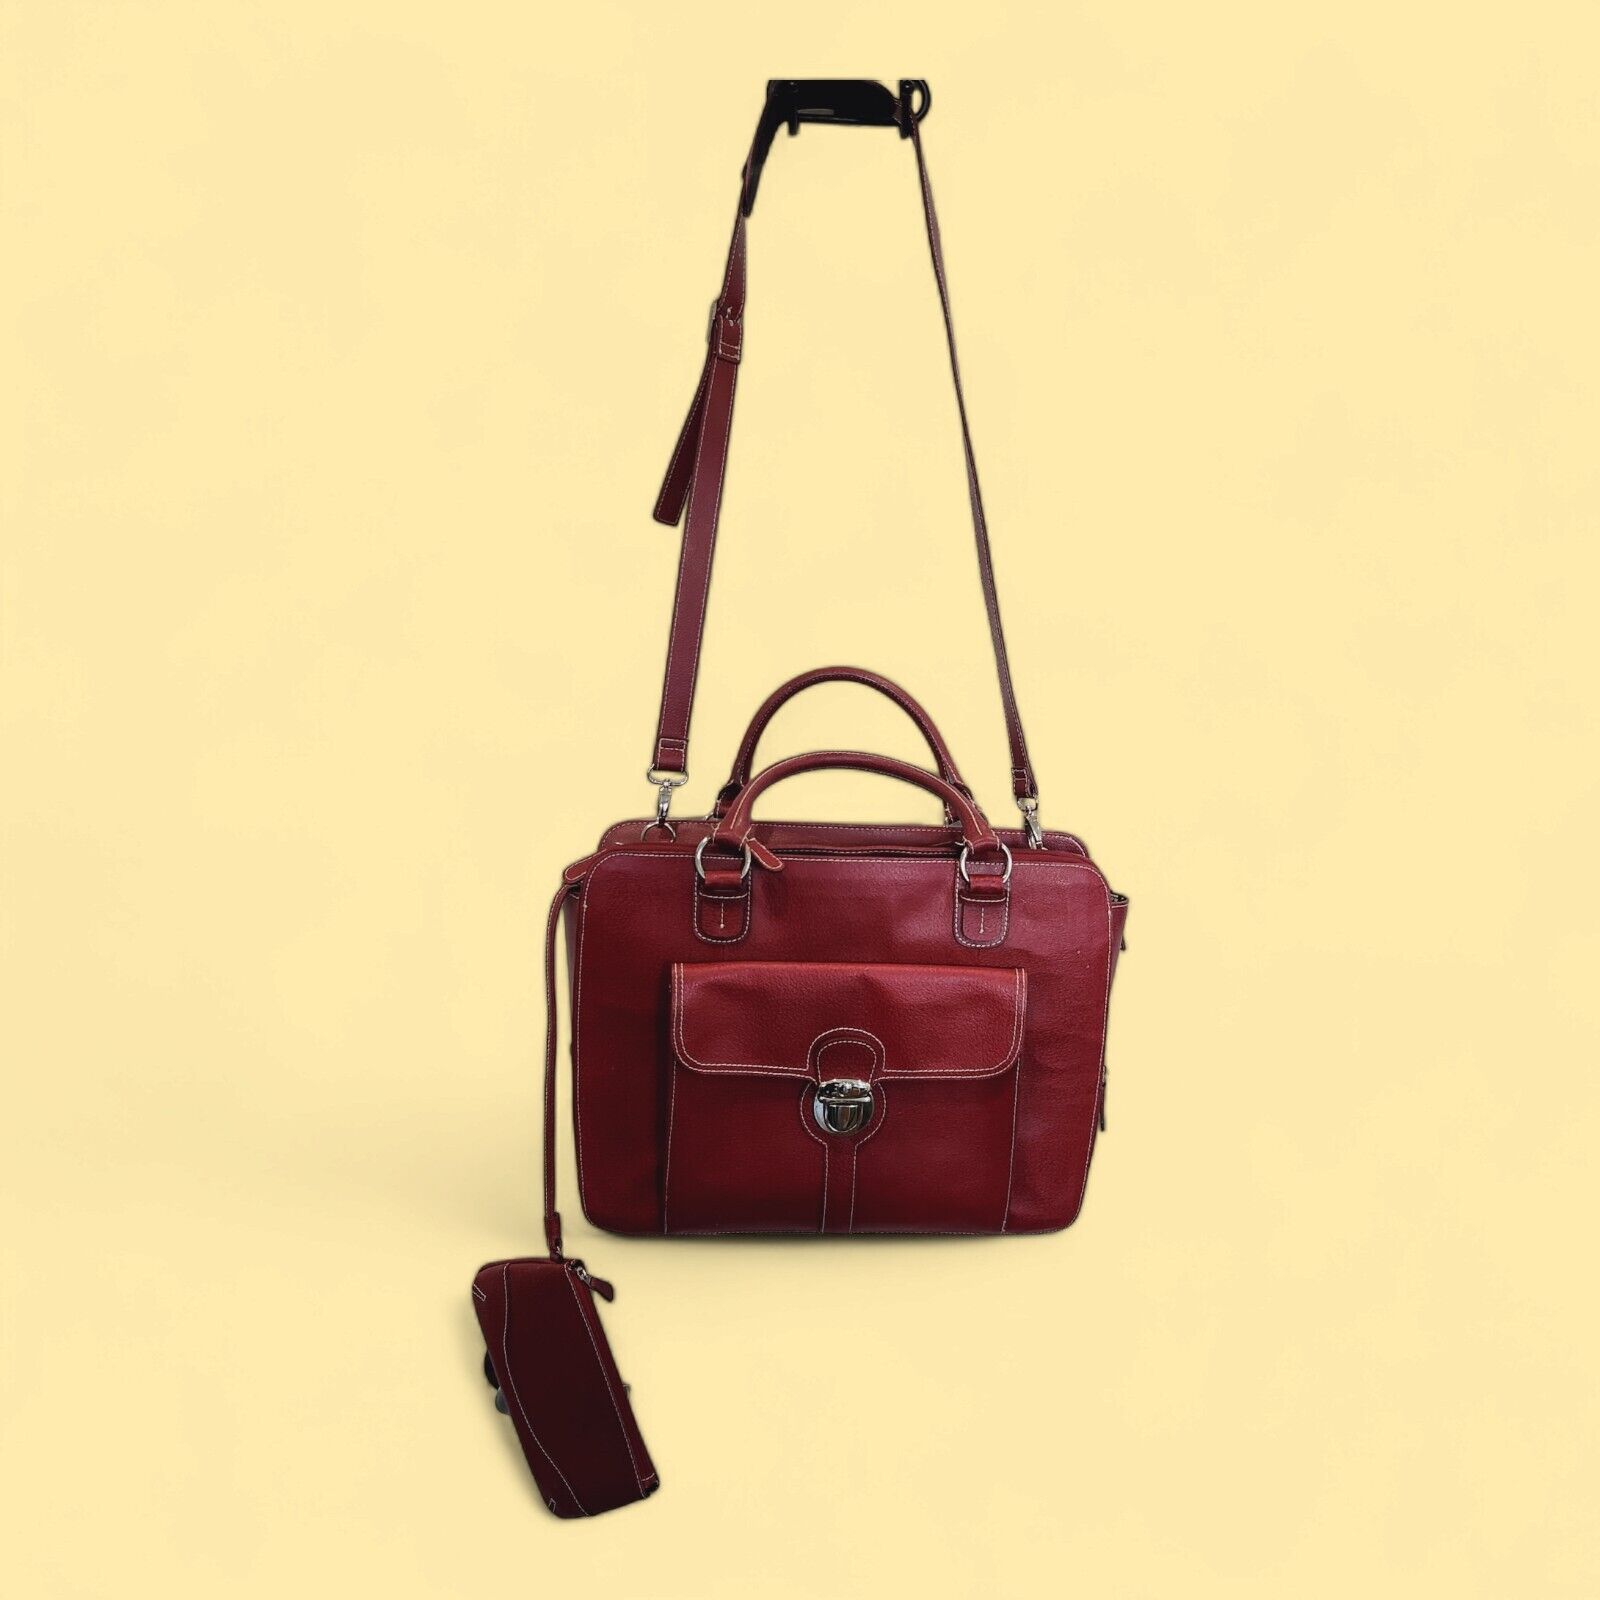 Franklin Covey Sharp and Large Computer Bag Maroon/Red Genuine Leather Organizer